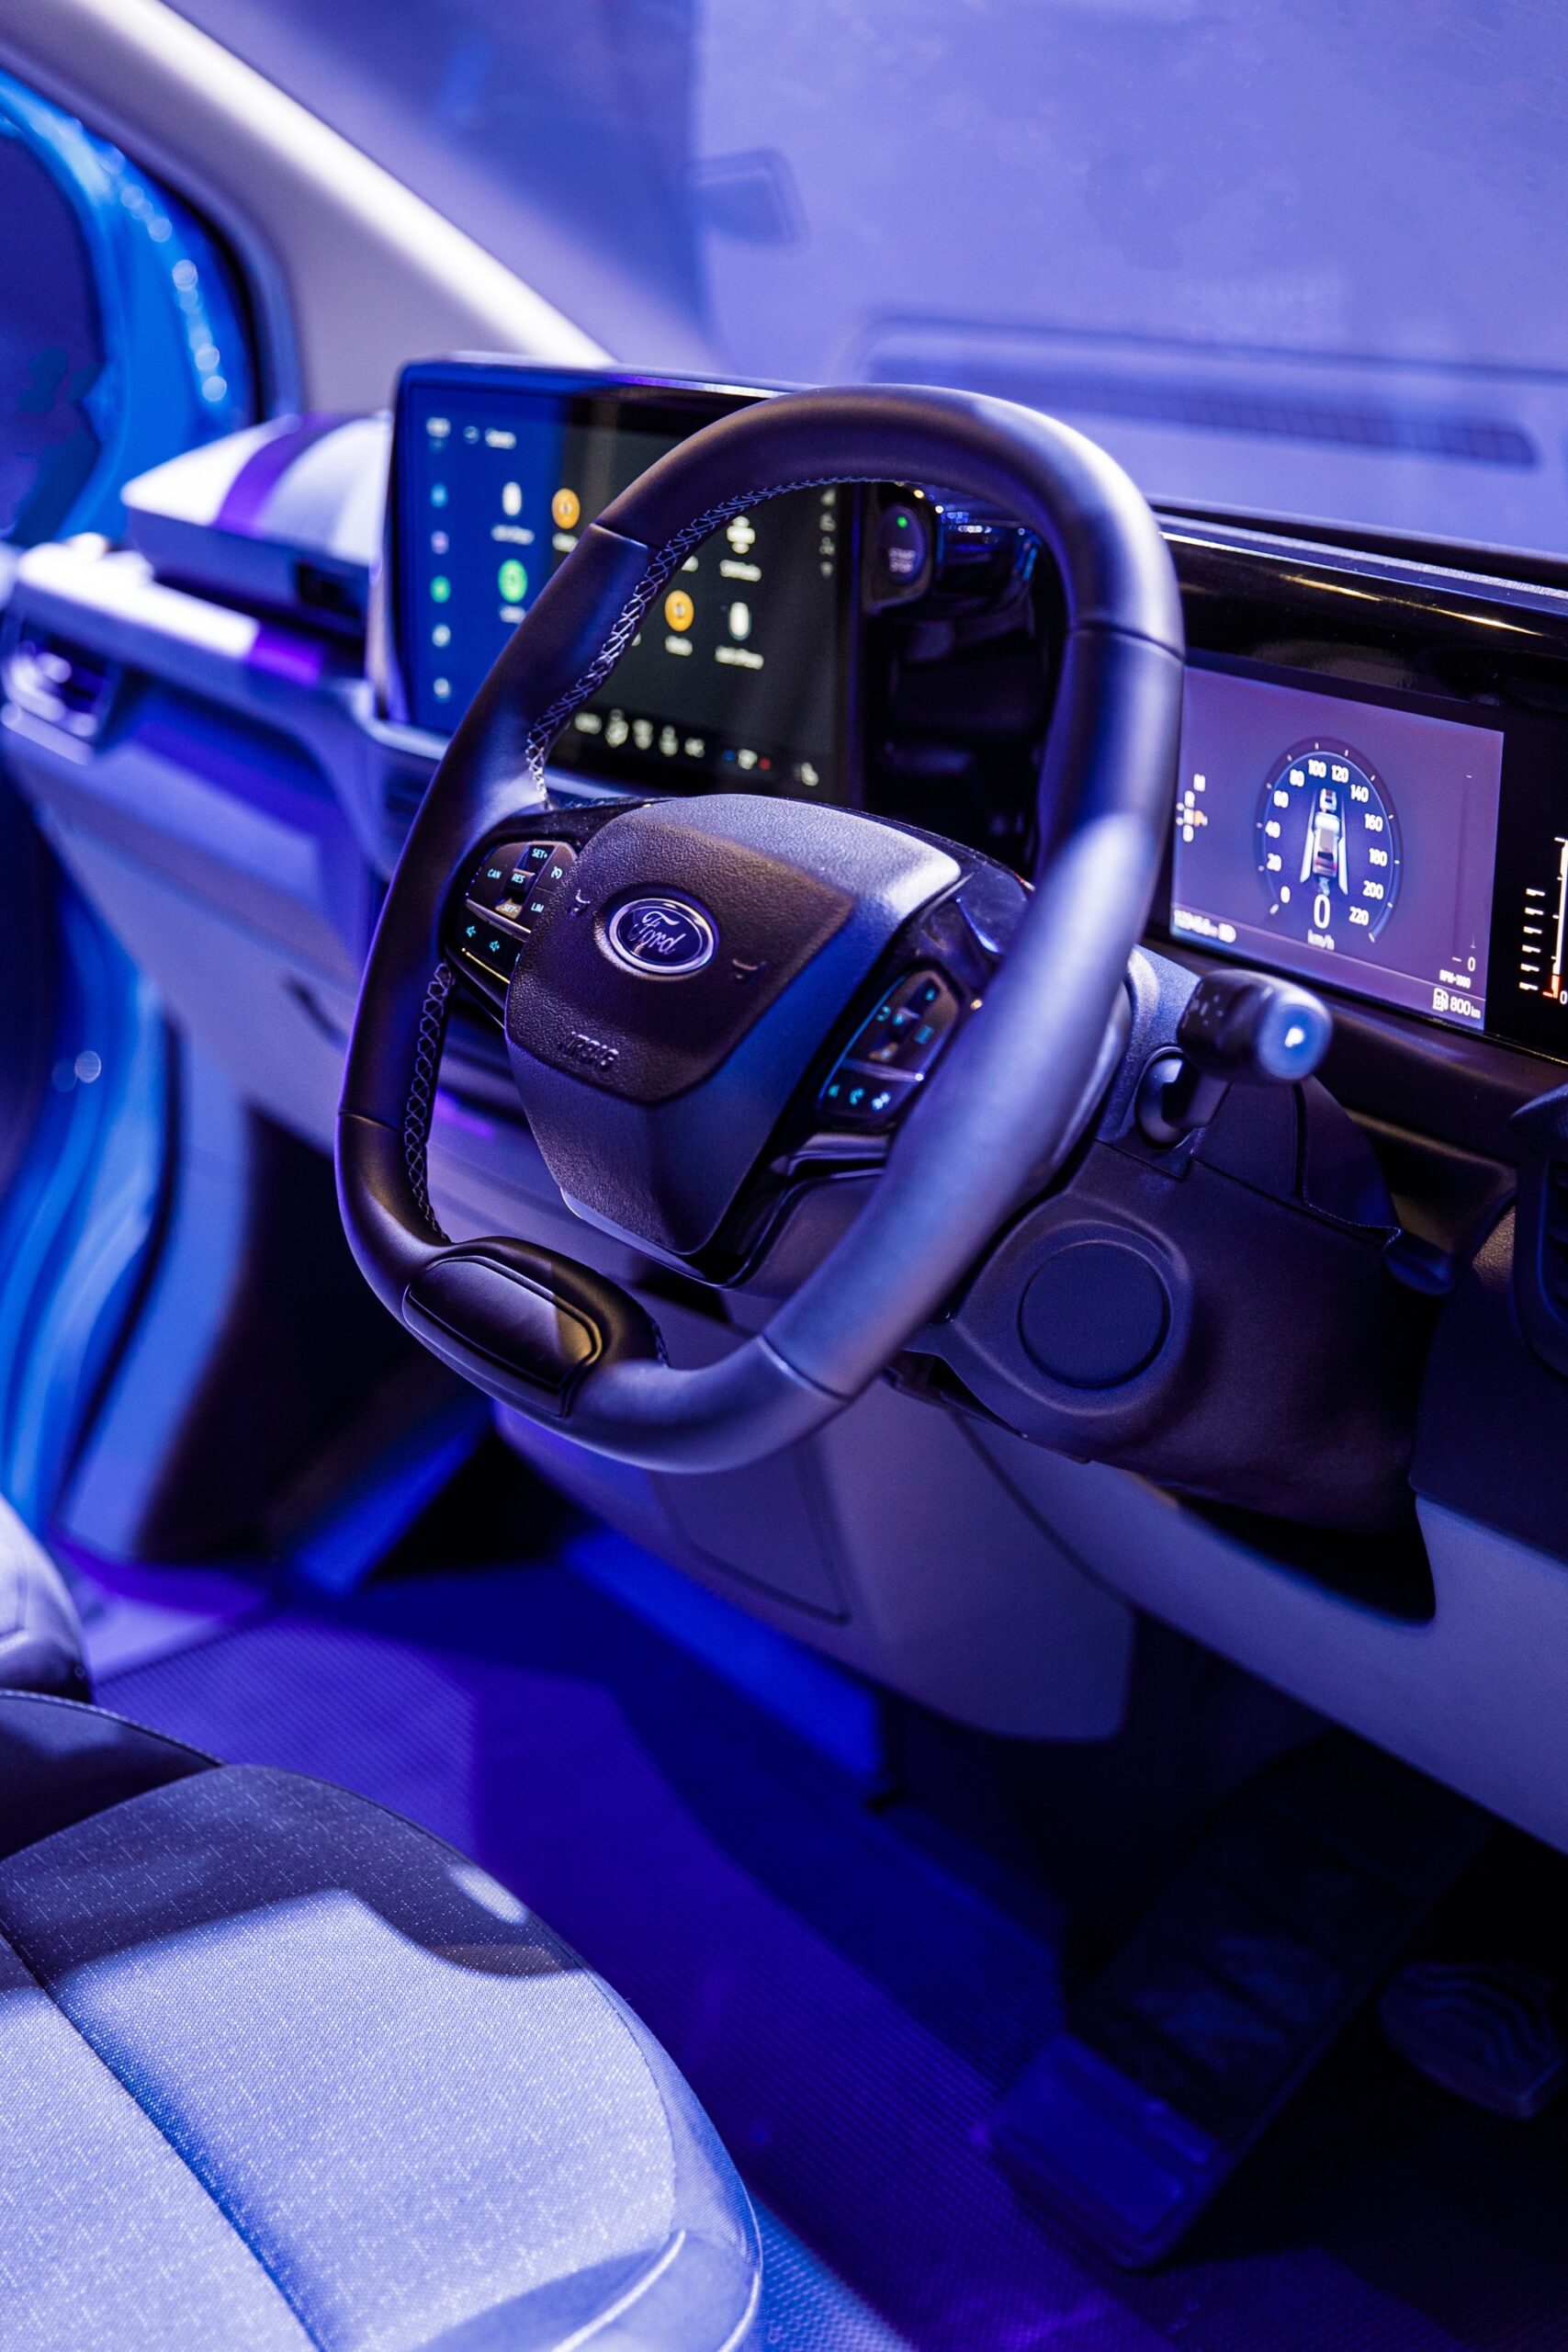 2024 Ford ETransit Custom To Offer 236 Miles Of Range And A “Mobile